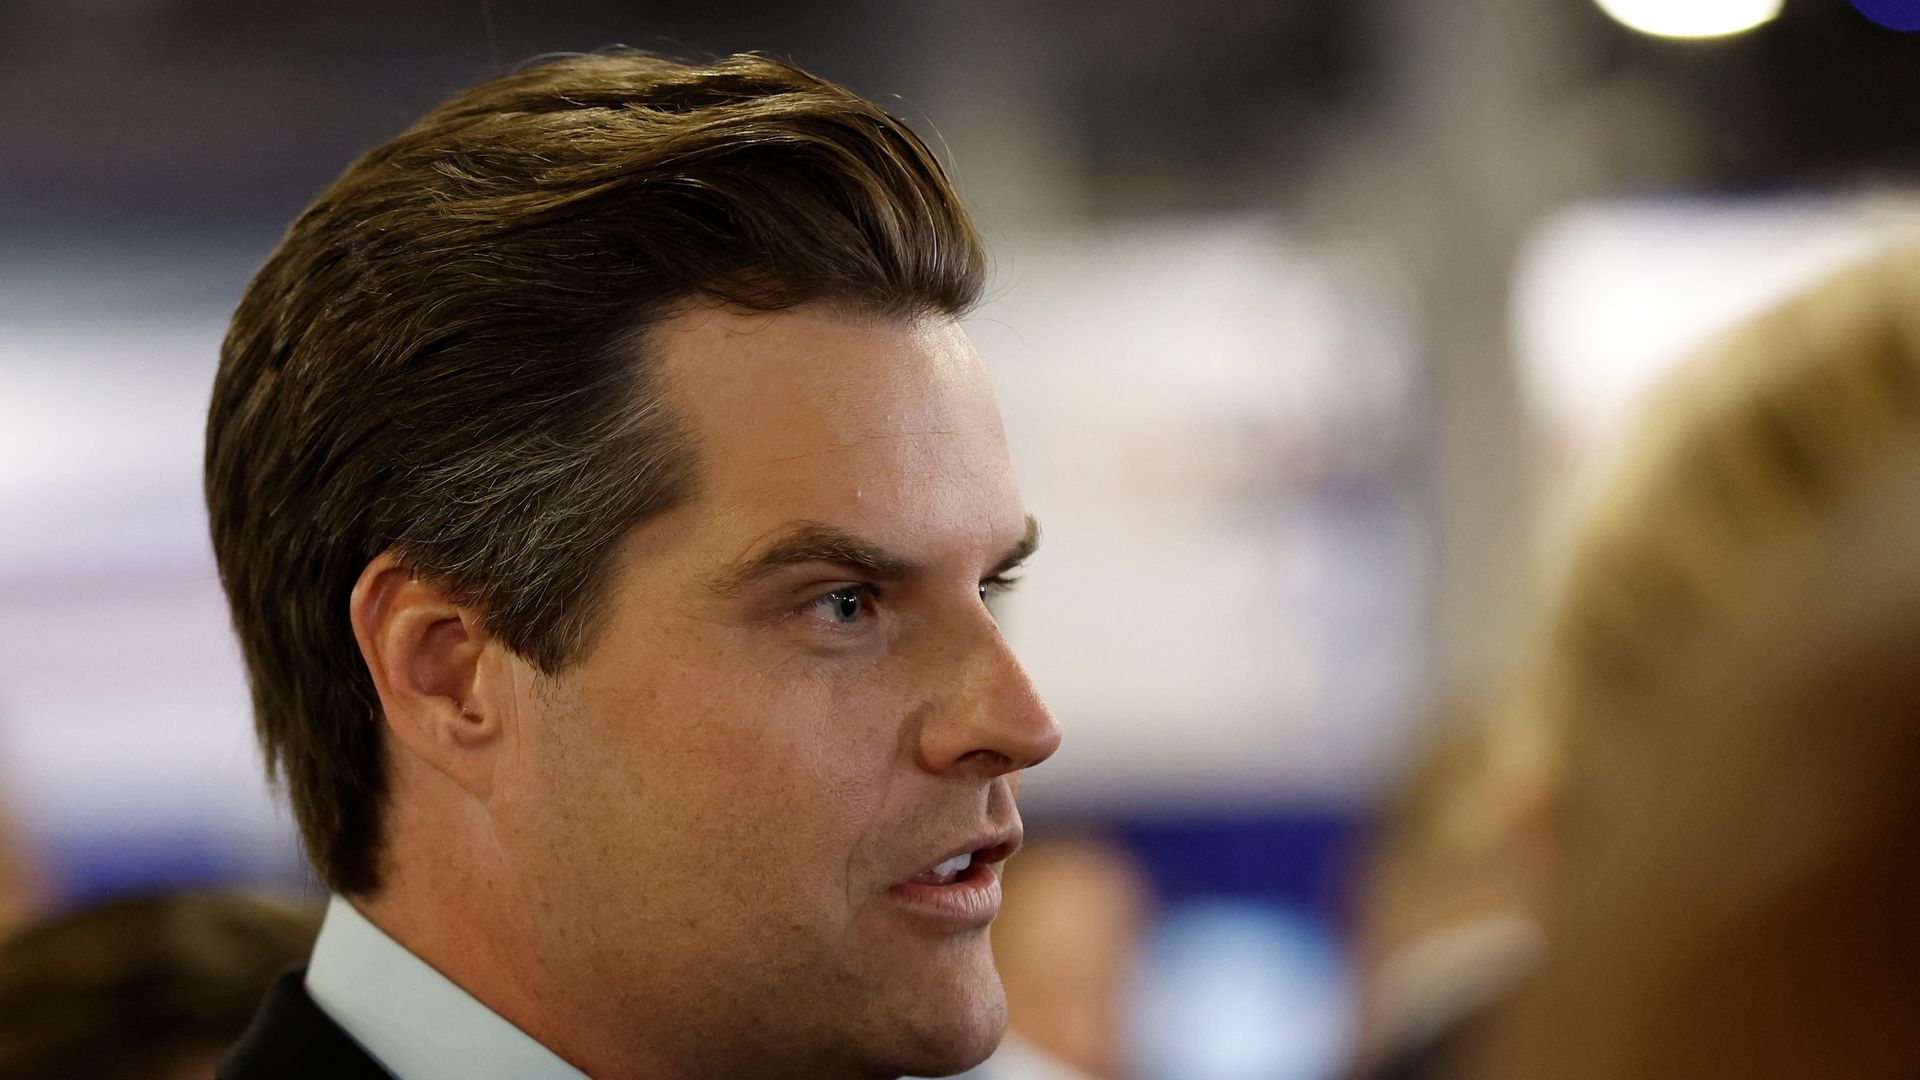 US Representative Matt Gaetz (R-FL) is seen in the Spin Room following the first Republican Presidential primary debate at the Fiserv Forum in Milwaukee, Wisconsin, on August 23, 2023. (Photo by KAMIL KRZACZYNSKI / AFP) (Photo by KAMIL KRZACZYNSKI/AFP via Getty Images)